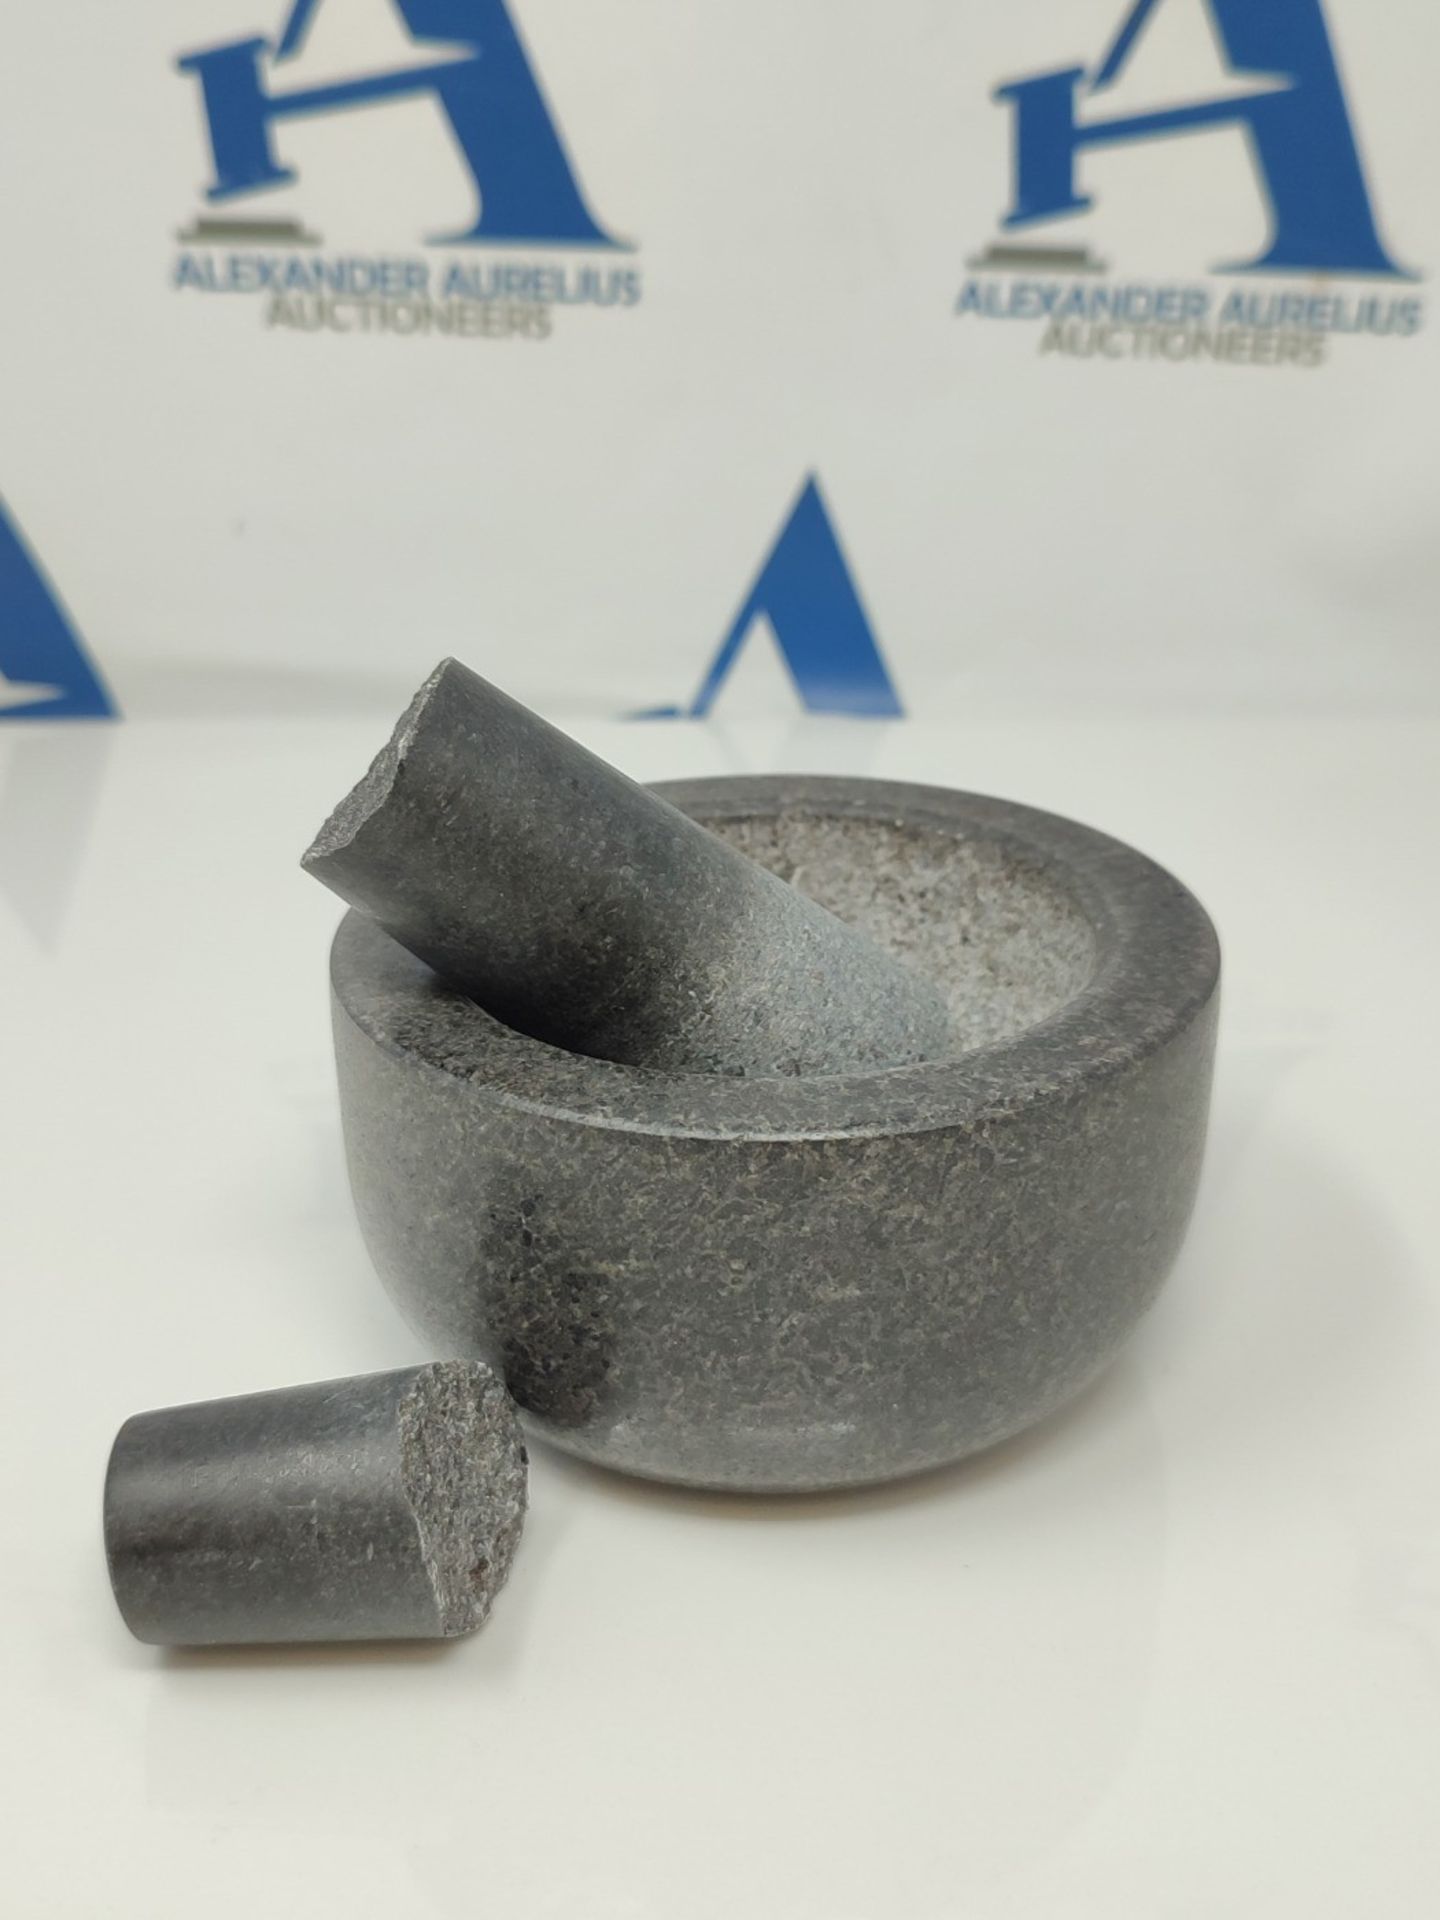 Classic Granite Pestle And Mortar By Silk Route Home - Image 2 of 2